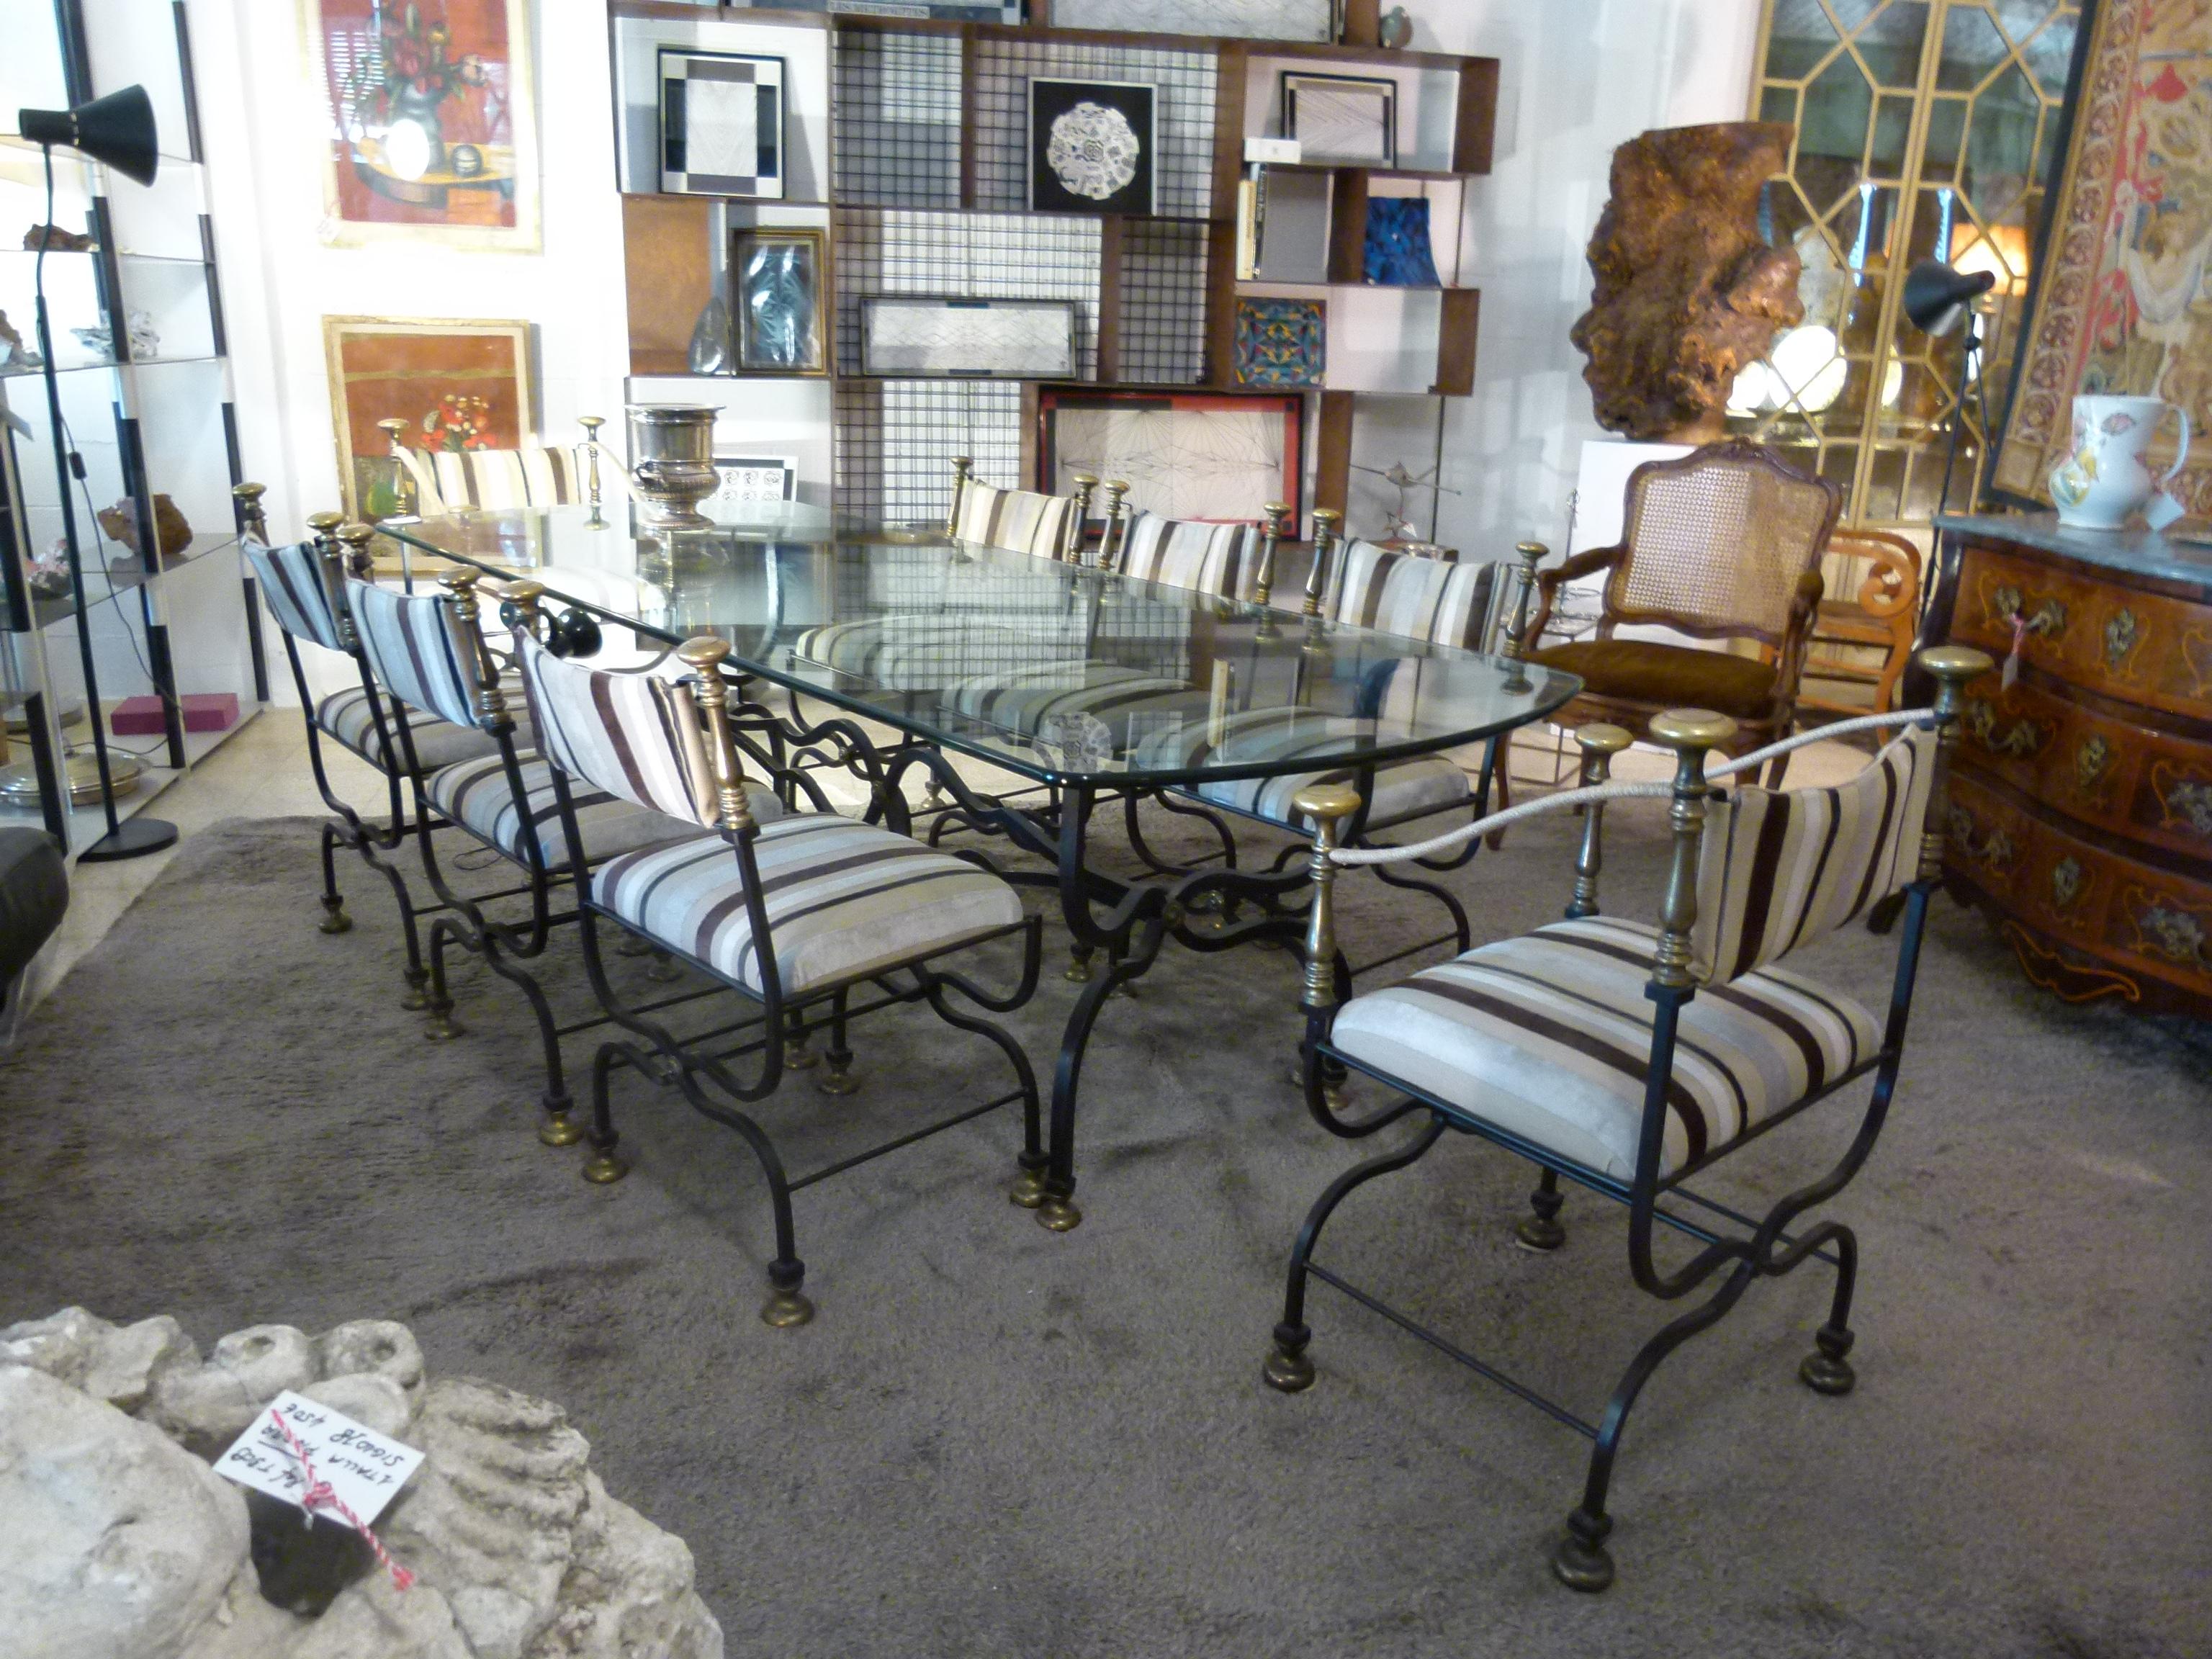 Large  glass top dining table with rounded corners and wrought iron base.  4  iron chairs and 2 iron armchairs  complete the whole dining set.

Measurements:
Table: 100 x 250 x 75cm. Glass thickness 2 cm
Armchair: 60 x 47 x 91 cm
Chair: 51 x 56 x 88